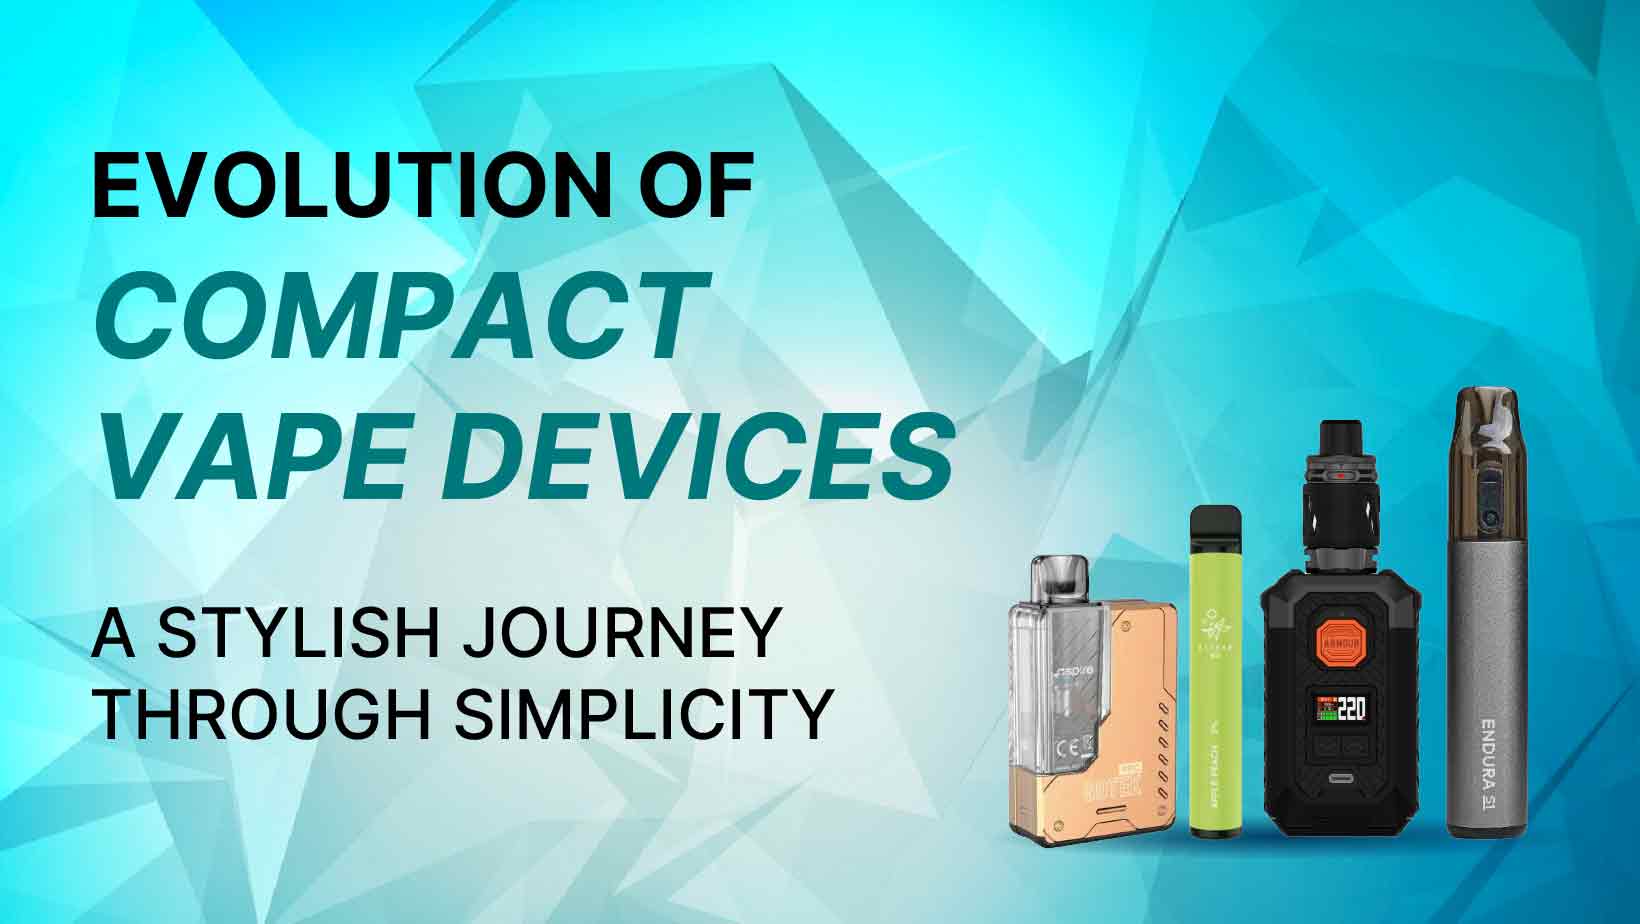 Evolution Of Compact Vape Devices: A Stylish Journey Through Simplicity